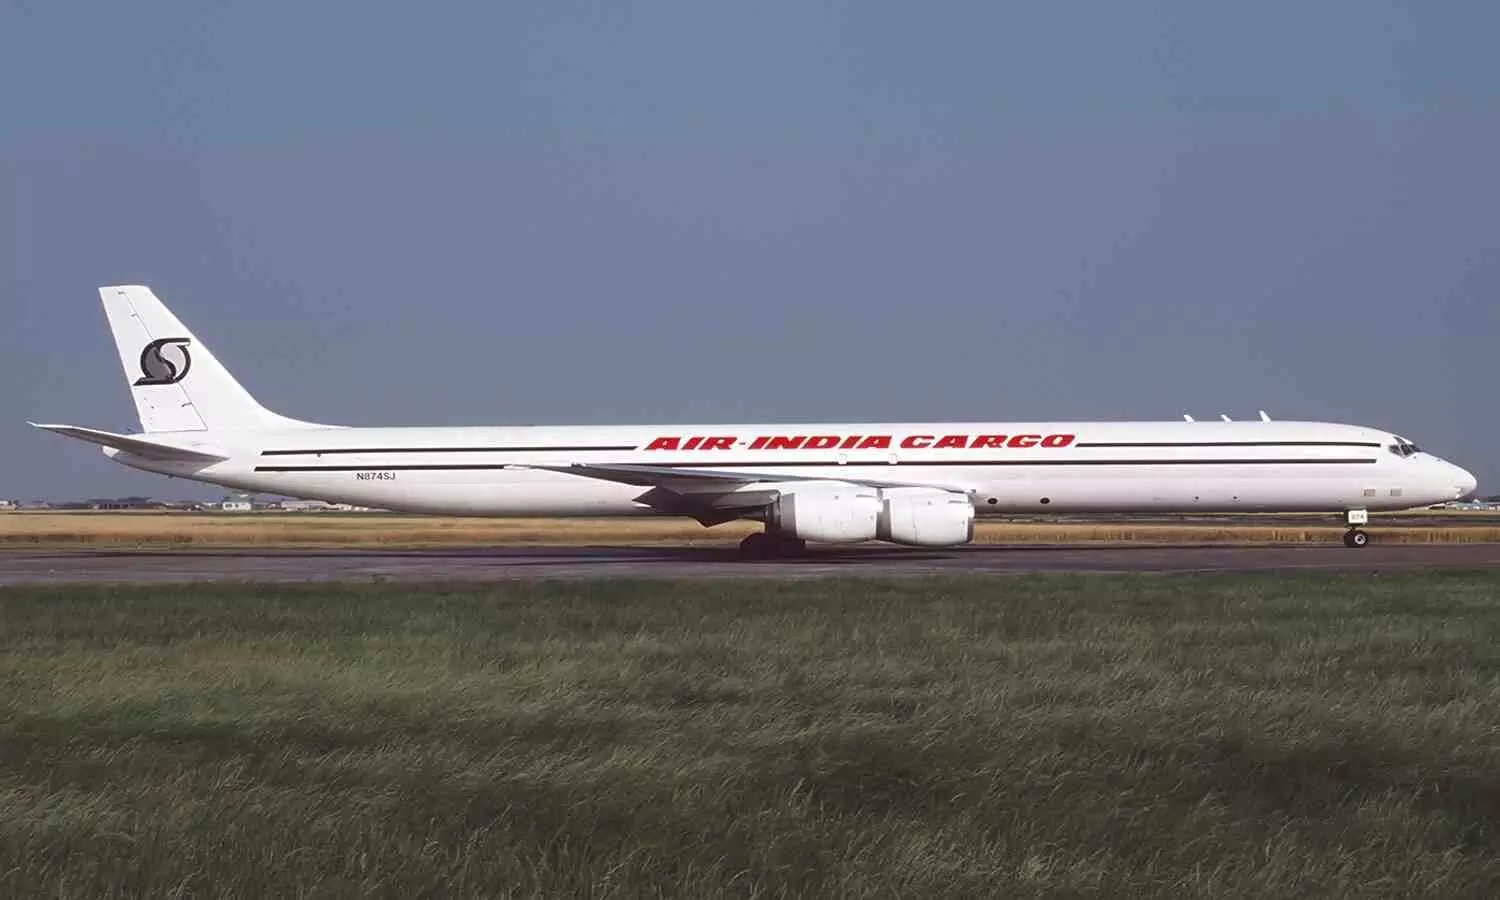 Air-India Cargo McDonnell Douglas DC-8-73(F) in Belgium, July 1994  Source: Airliners.net